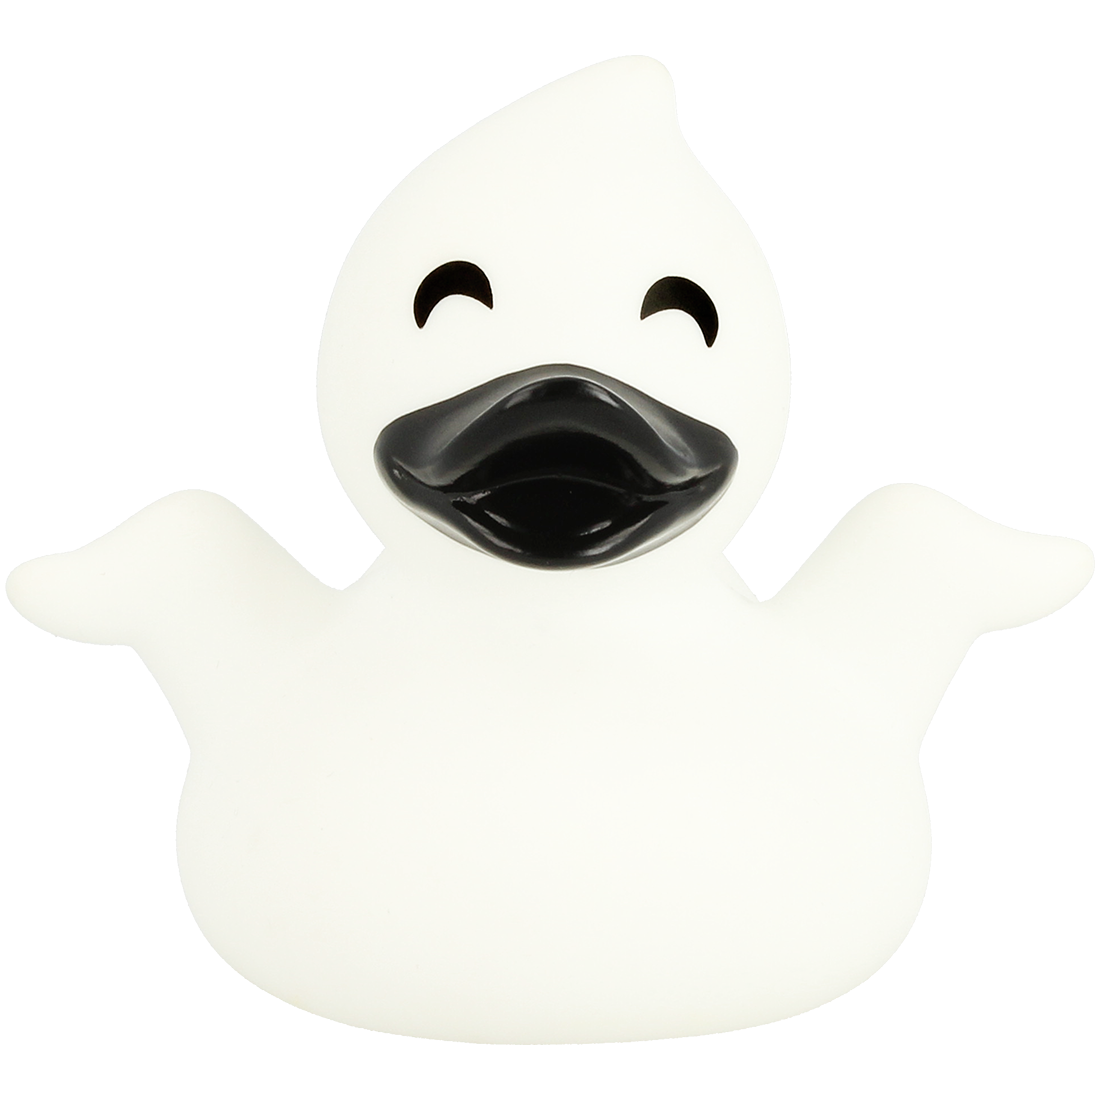 Ghost duck